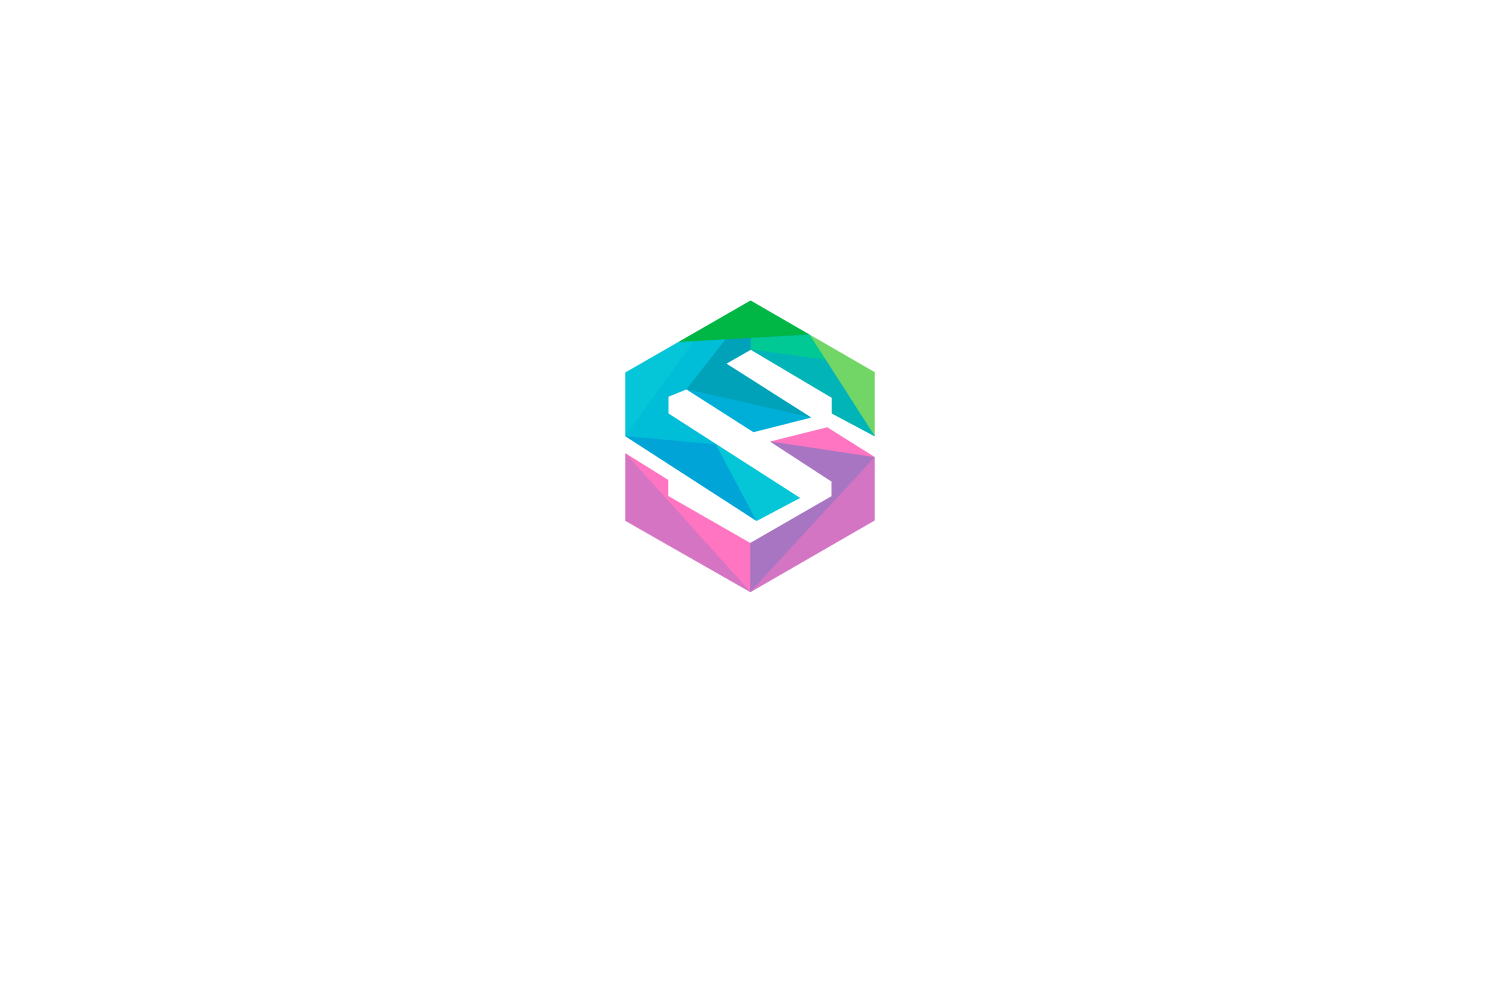 Solutions in Marketing Logo with white writing